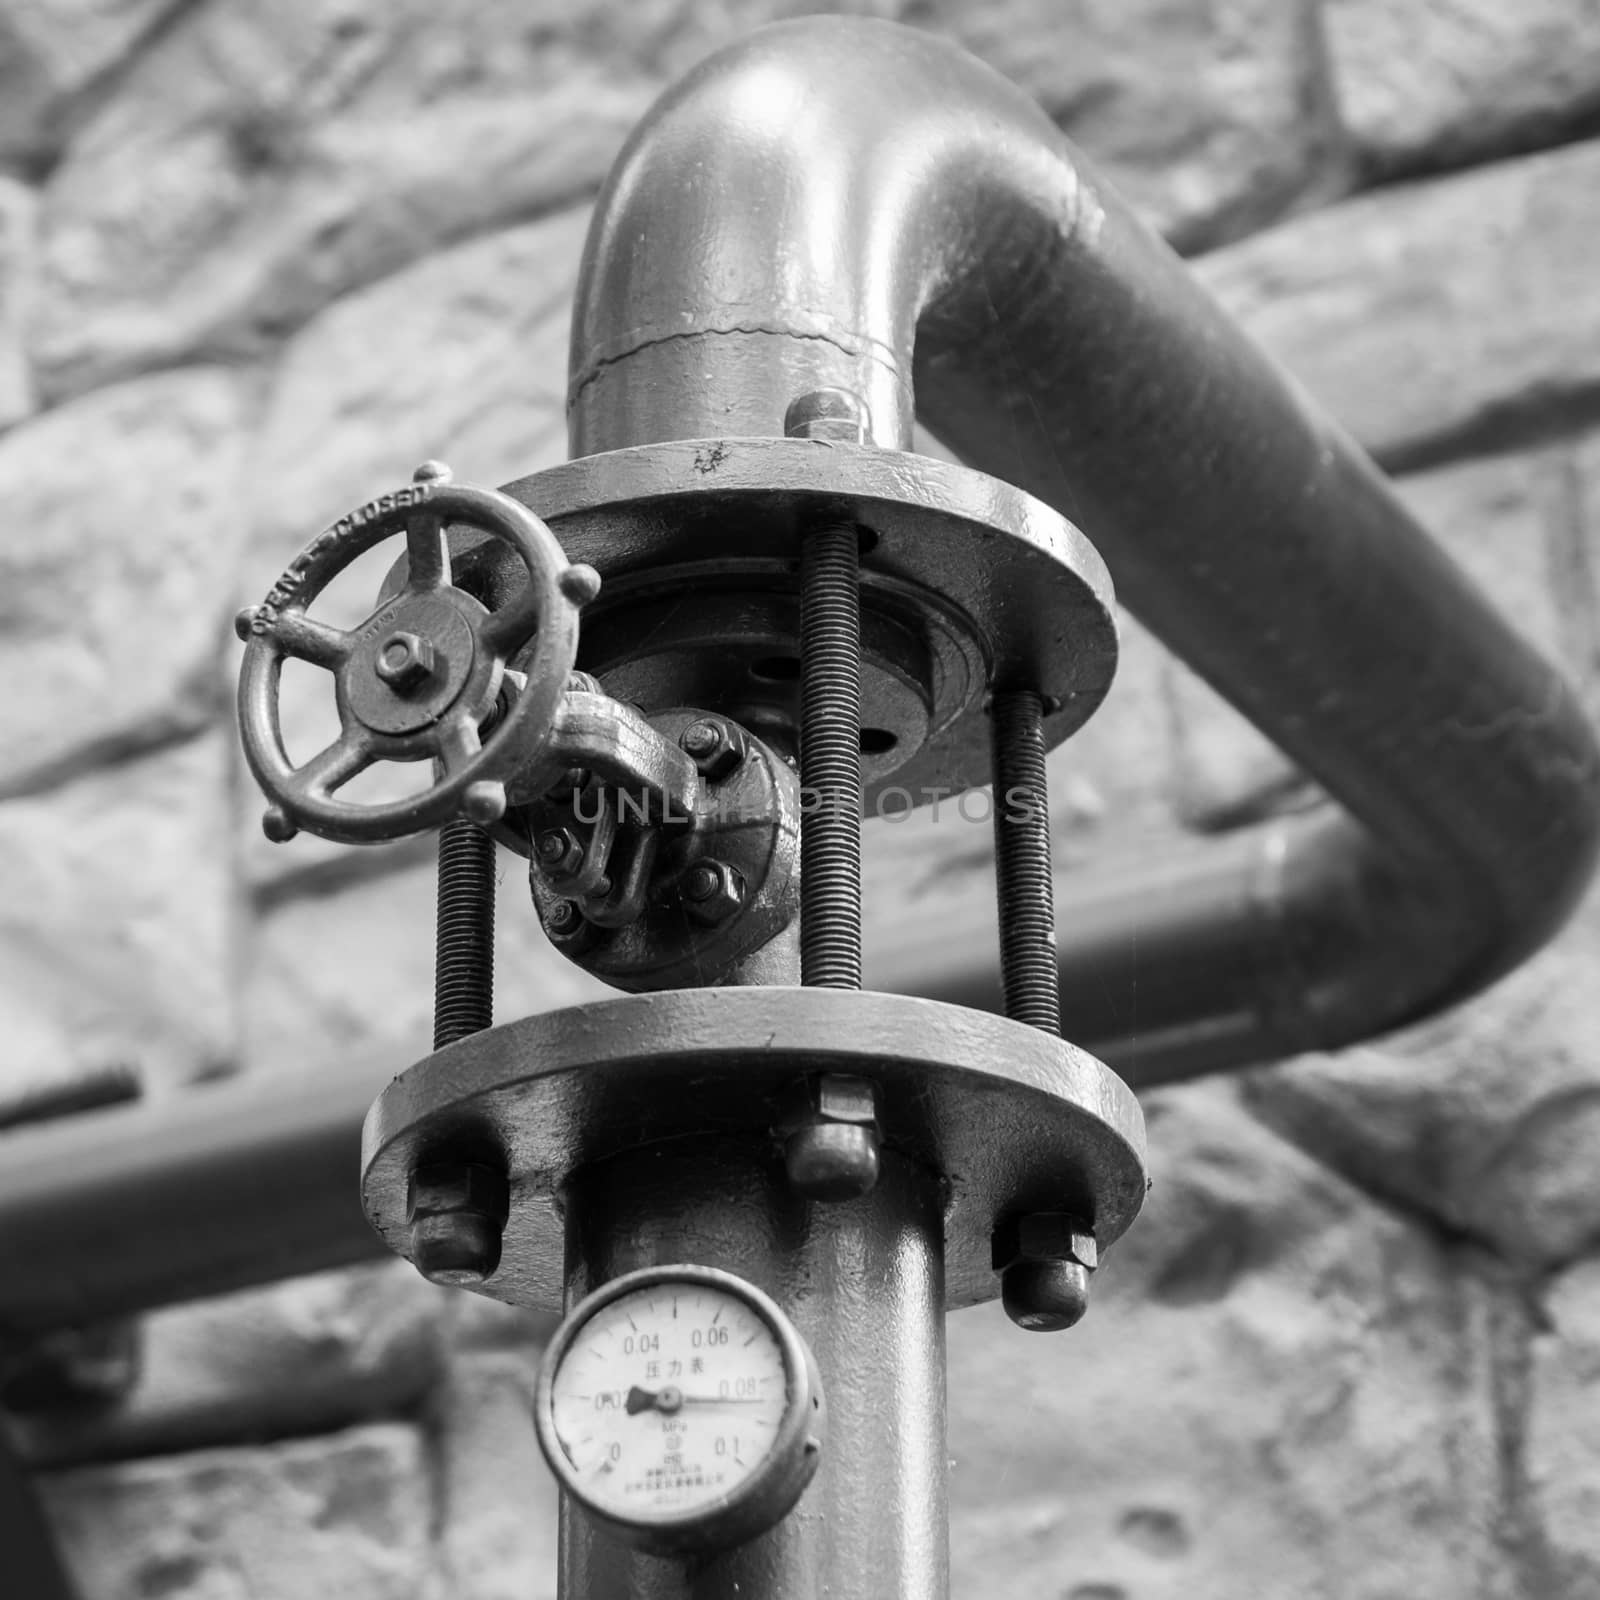 Valve to regulate the pressure in a brewery. by Isaac74